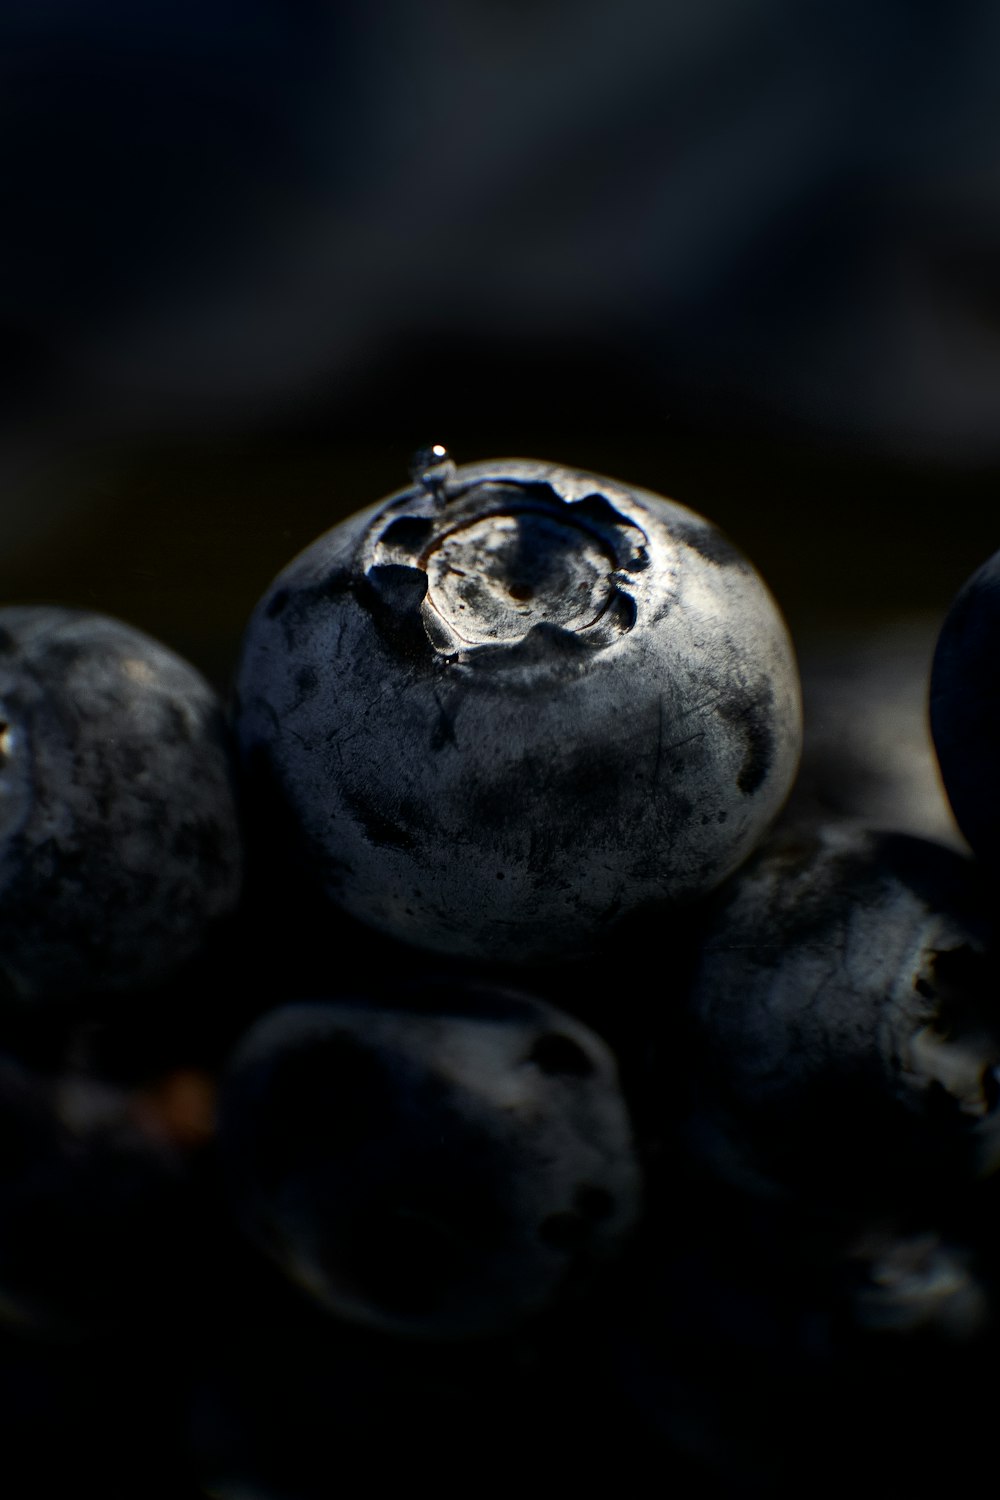 black round fruit in close up photography